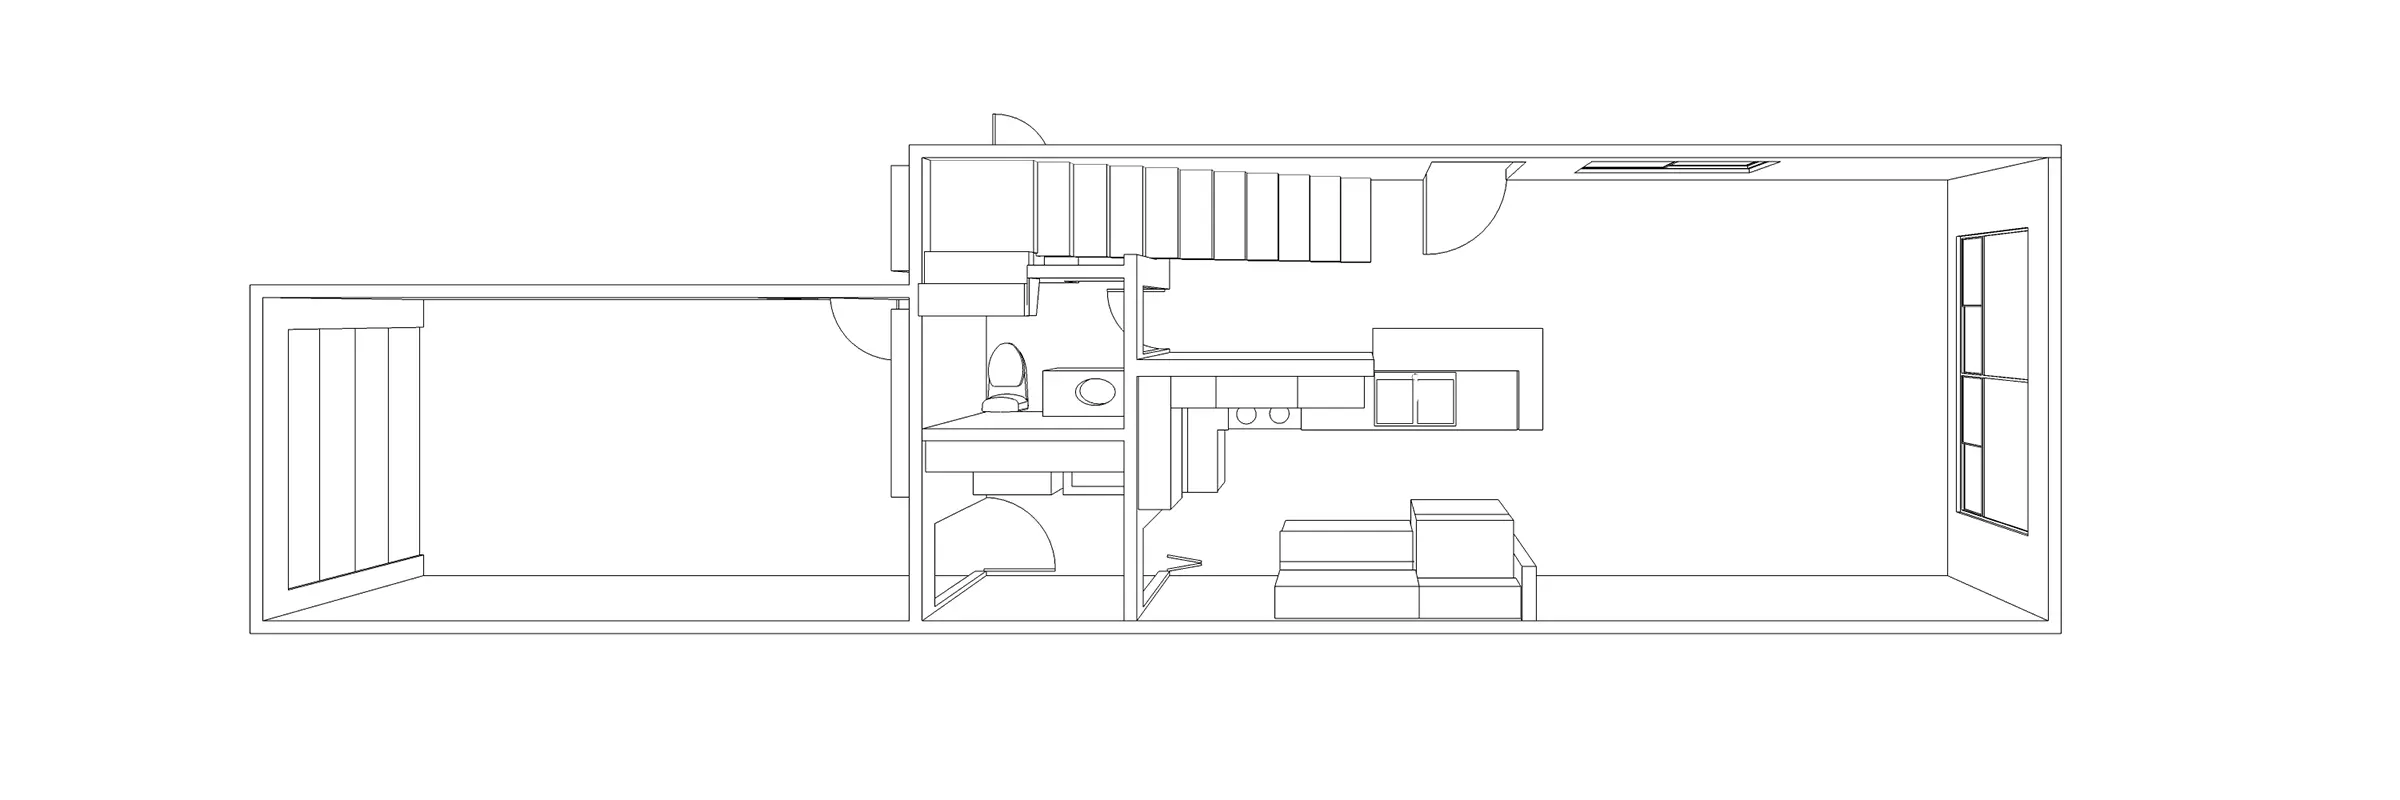 Perspective projection of existing ground floor layout showing twisting access to the garage from the kitchen.